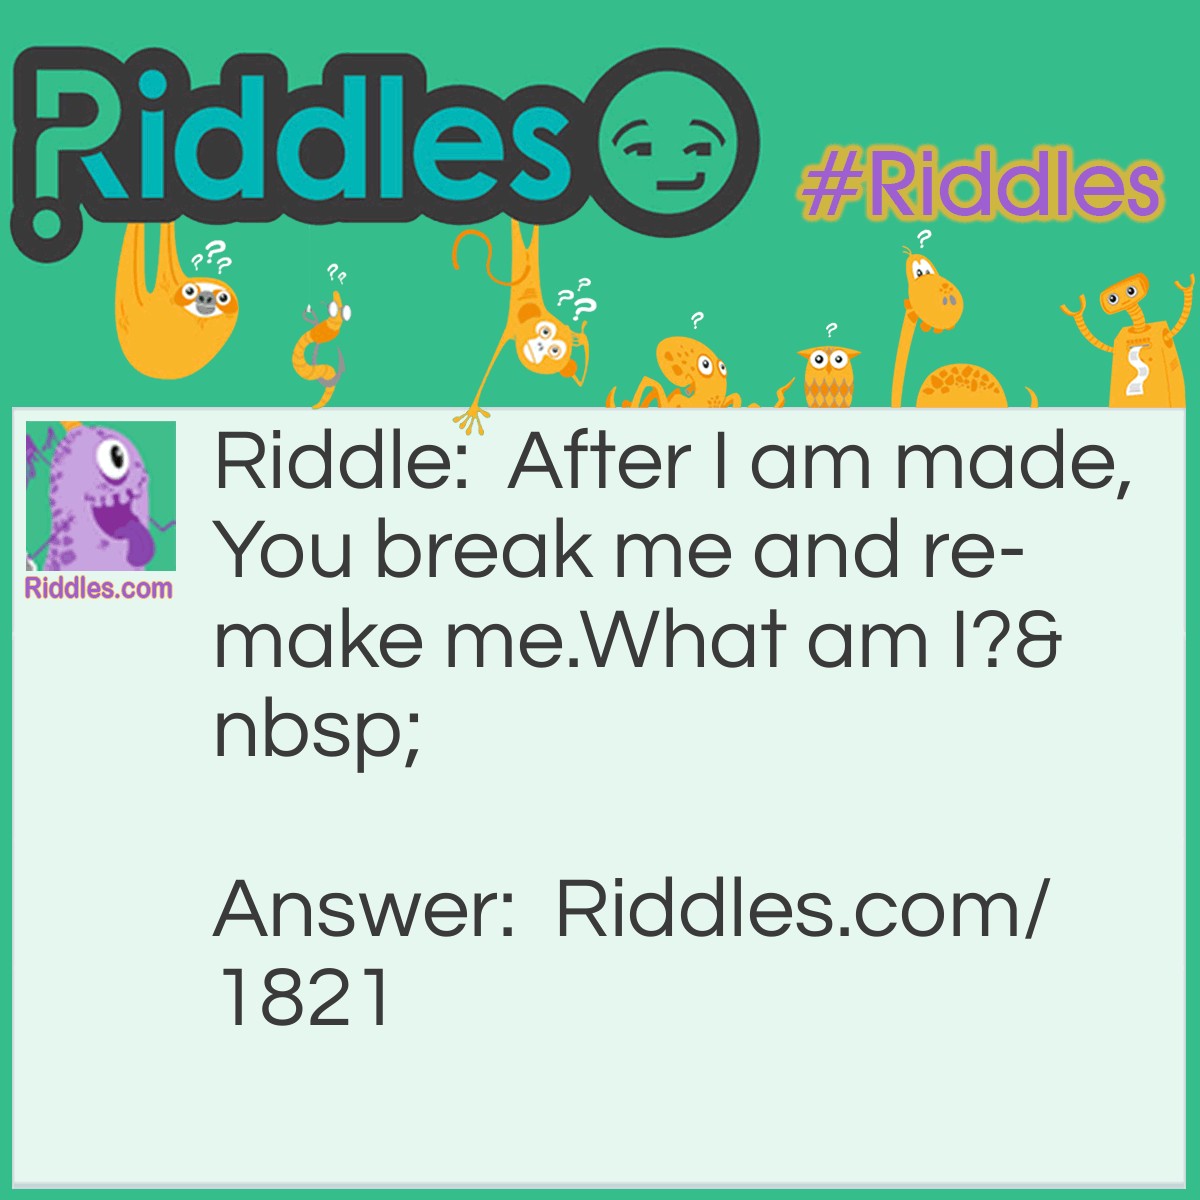 Riddle: After I am made,
You break me and re-make me.
What am I? Answer: An egg.